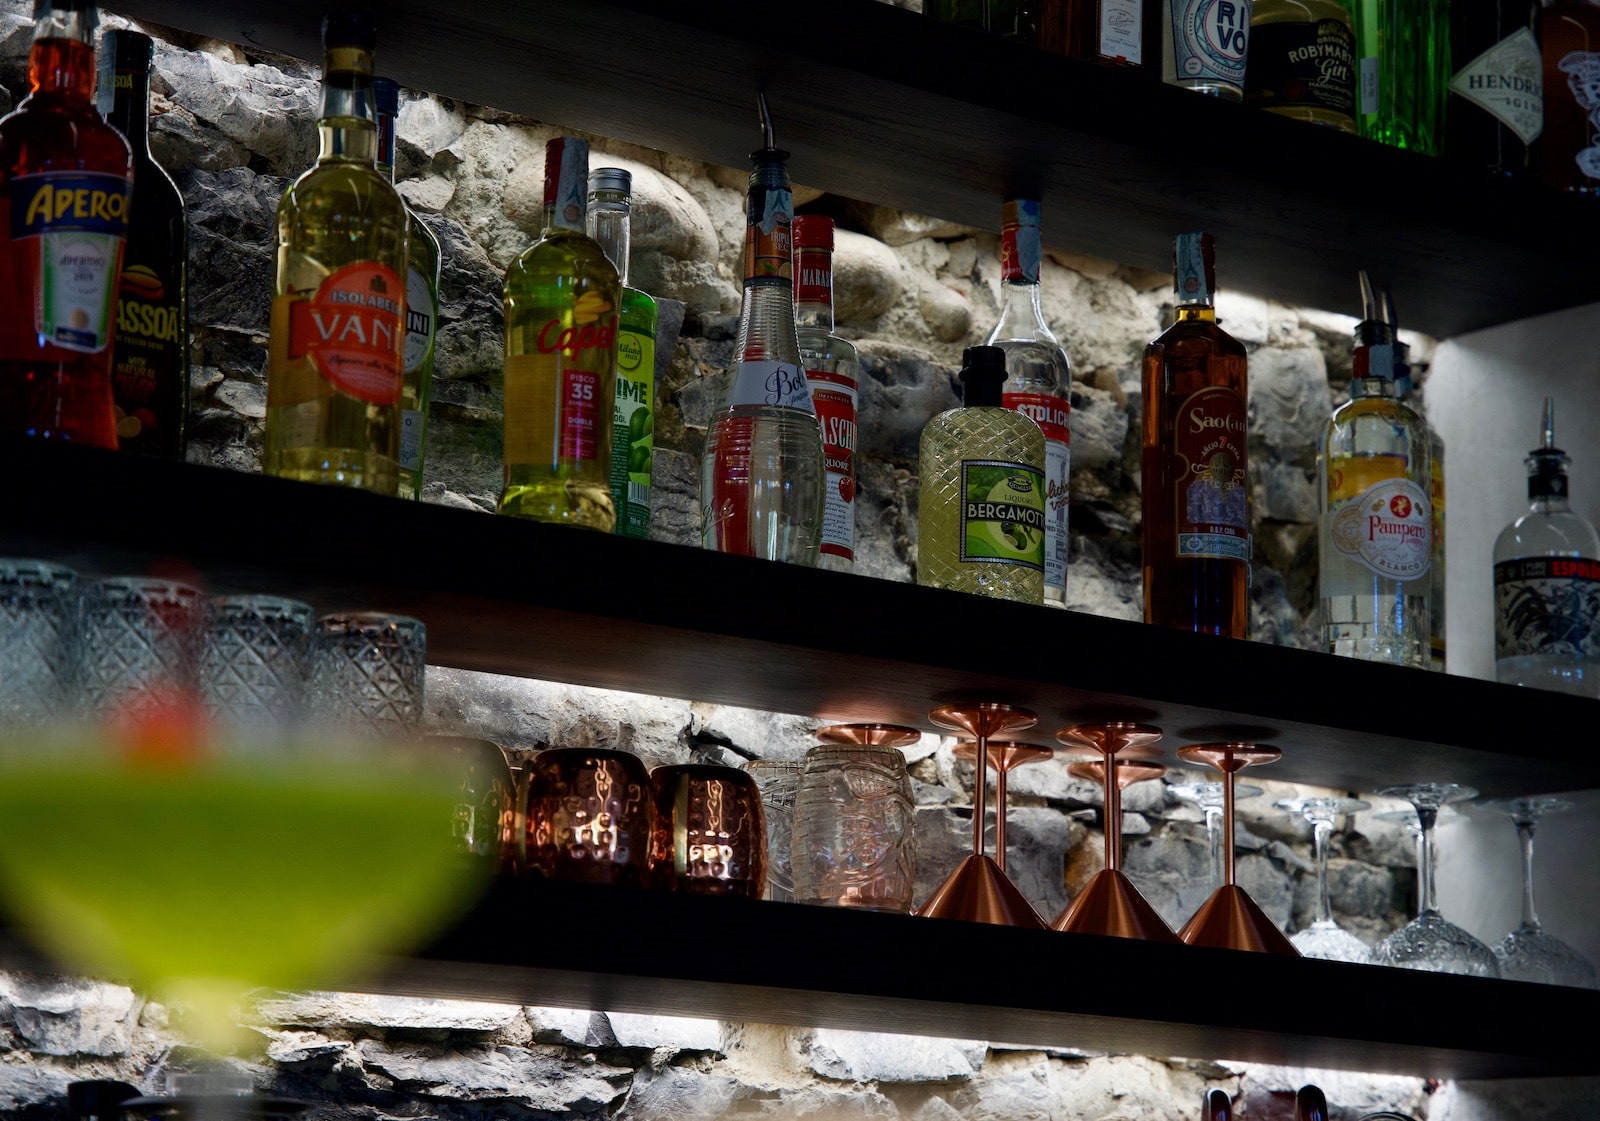 The wall of the cocktail bar Seta in Bellagio with the main spirits bottles